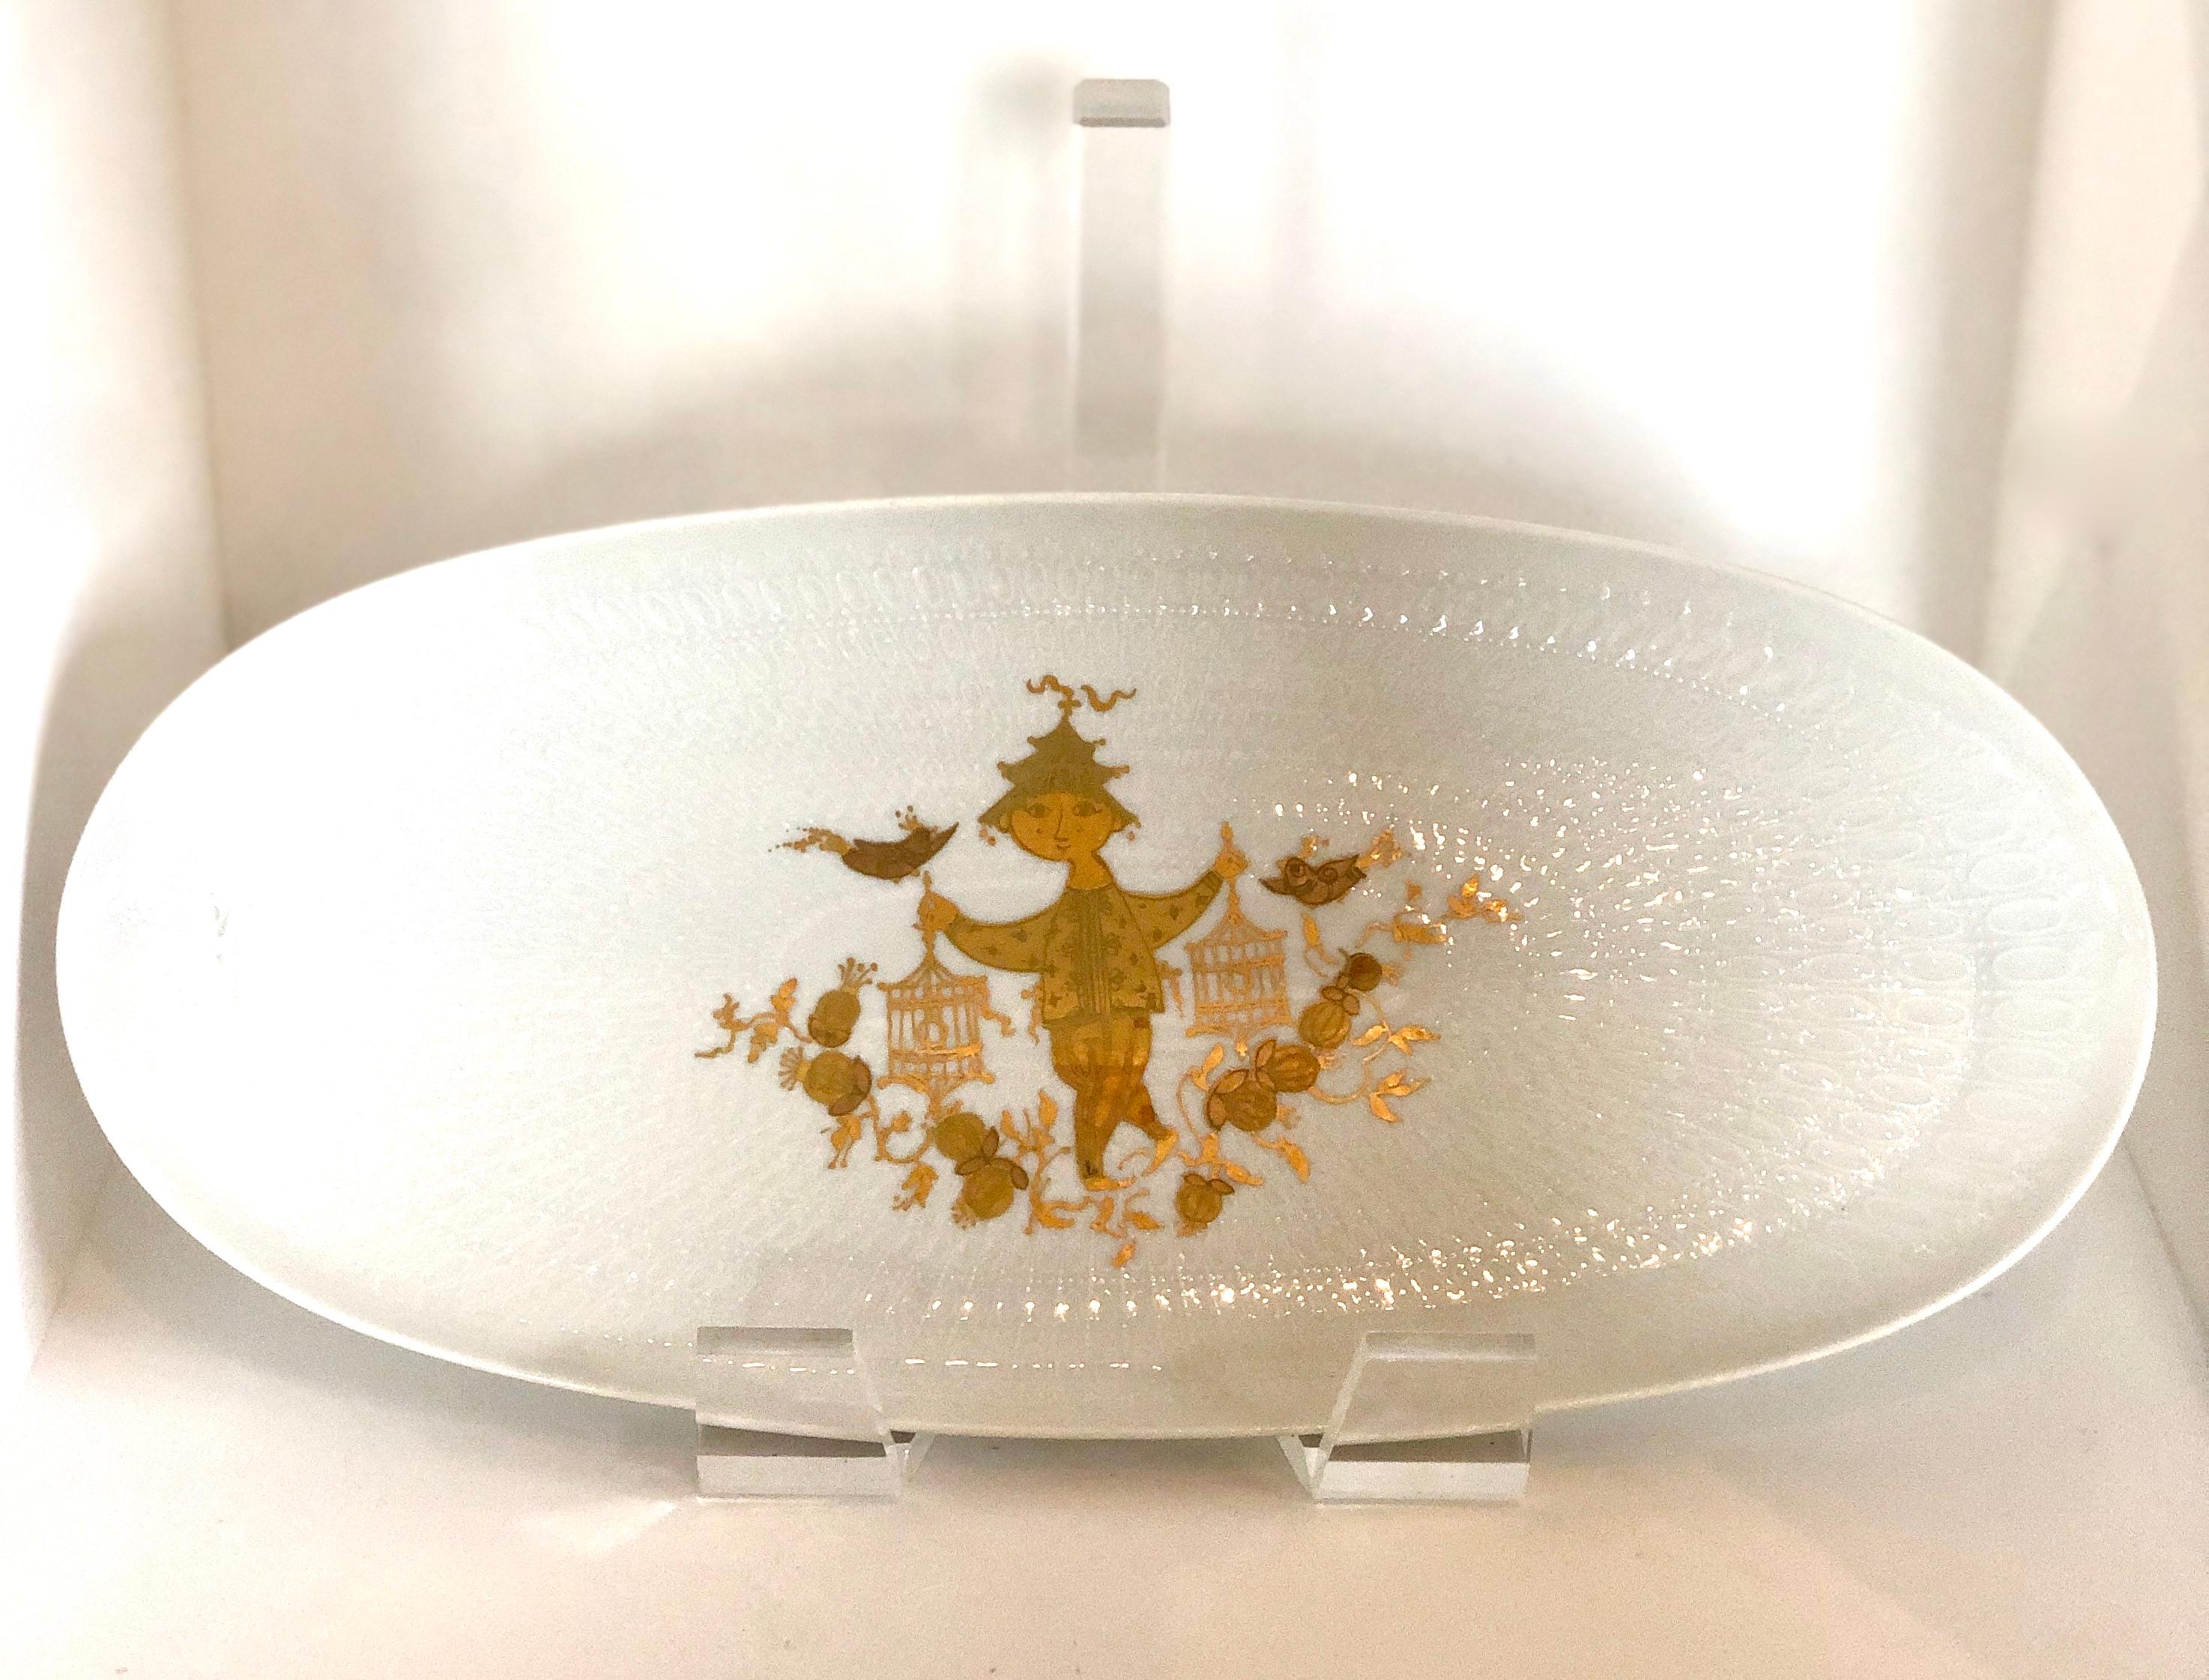 Offered is a signed Mid-Century Modern beautiful white textured porcelain decorative platter with gold leaf Asian / chinoiserie theme by Bjørn Wiinblad for Rosenthal. This decorative chinoiserie themed platter would look beautiful as a decorative